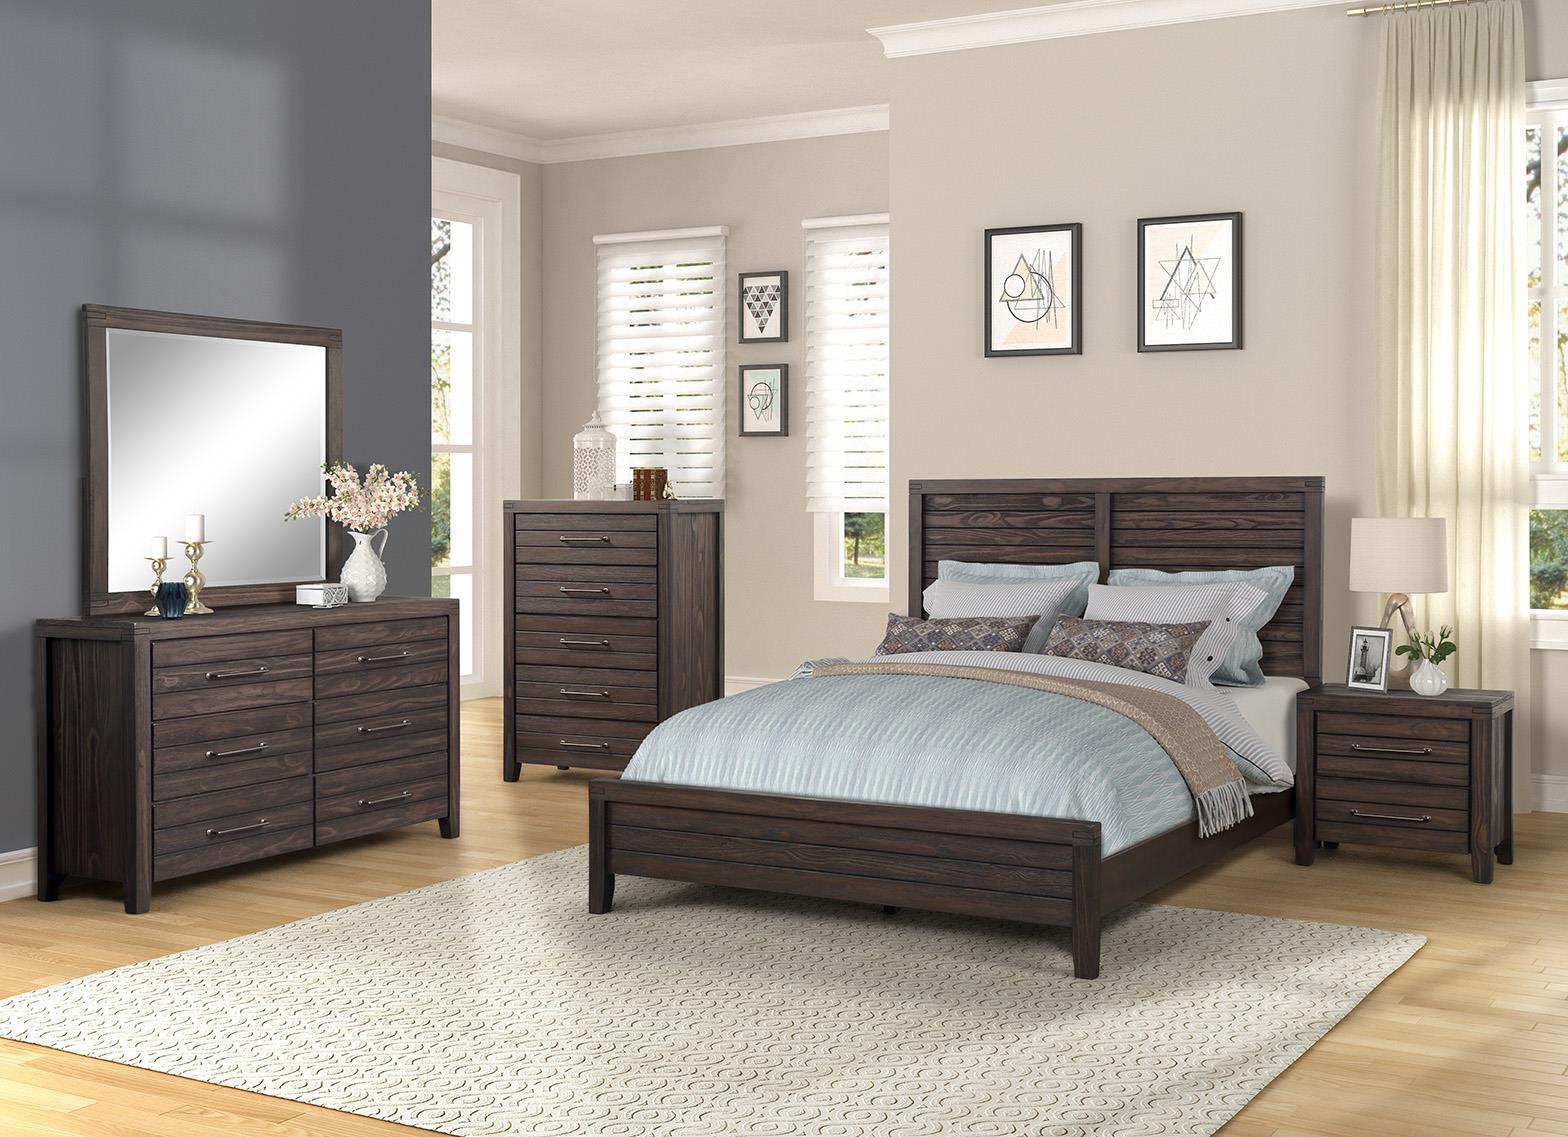 Contemporary, Traditional Panel Bed CRESTWOOD 1465-105 1465-105 in Auburn, Brown 